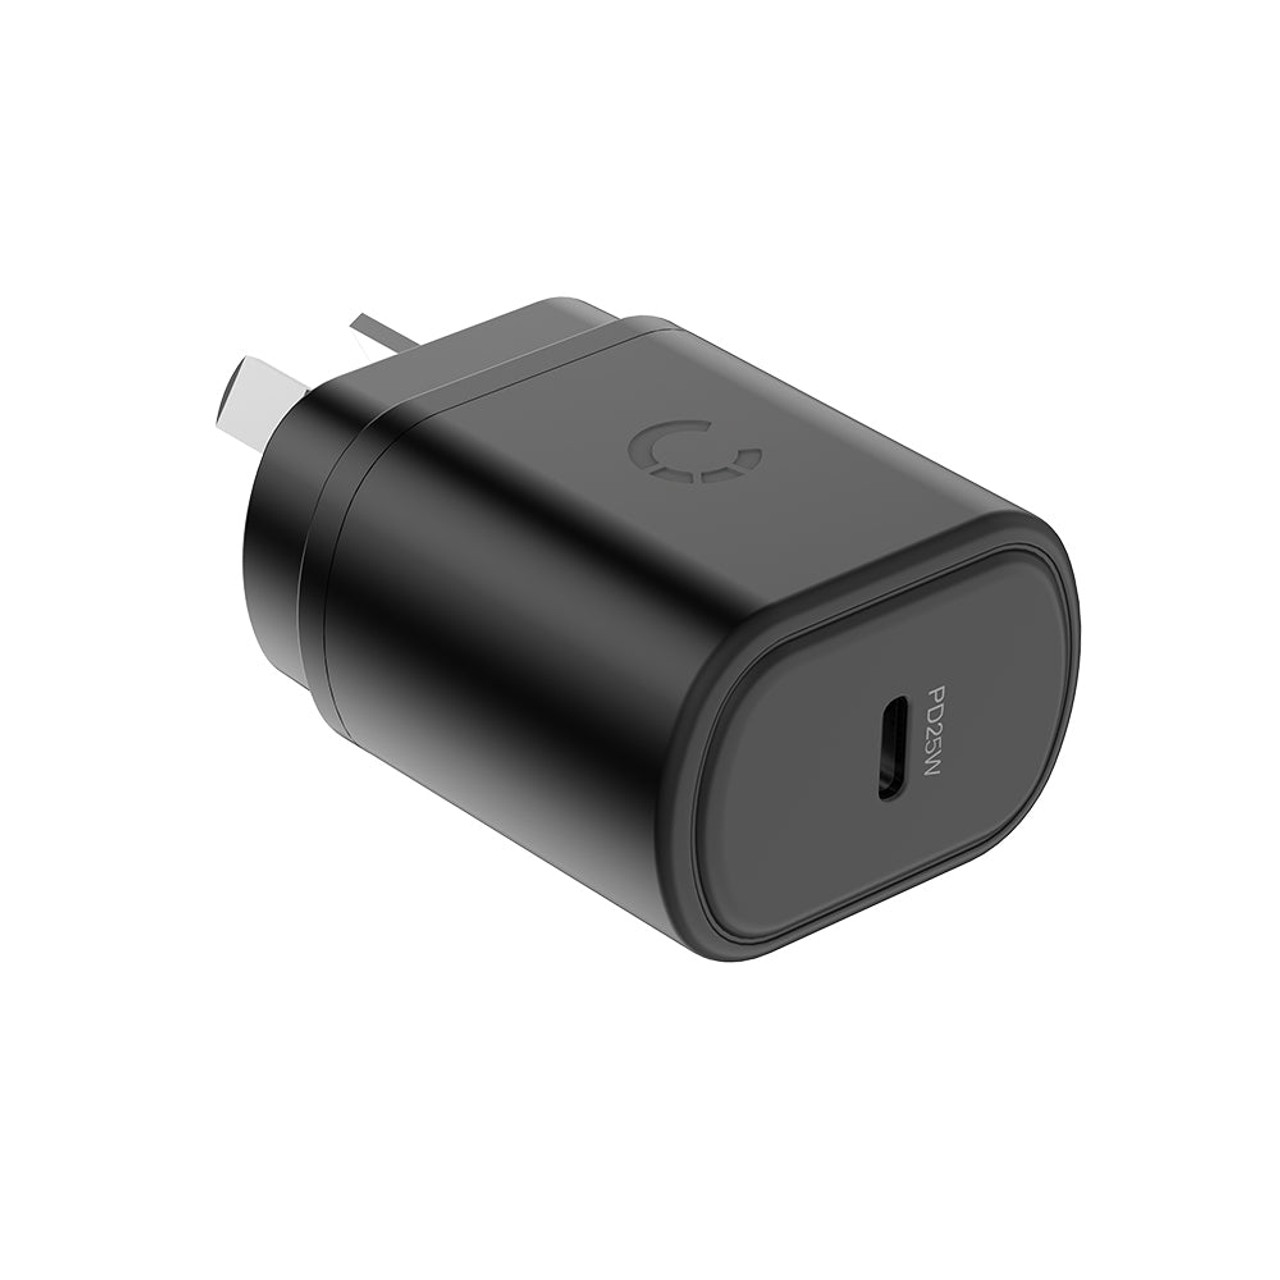 25W Super Fast Wall Charger, Black